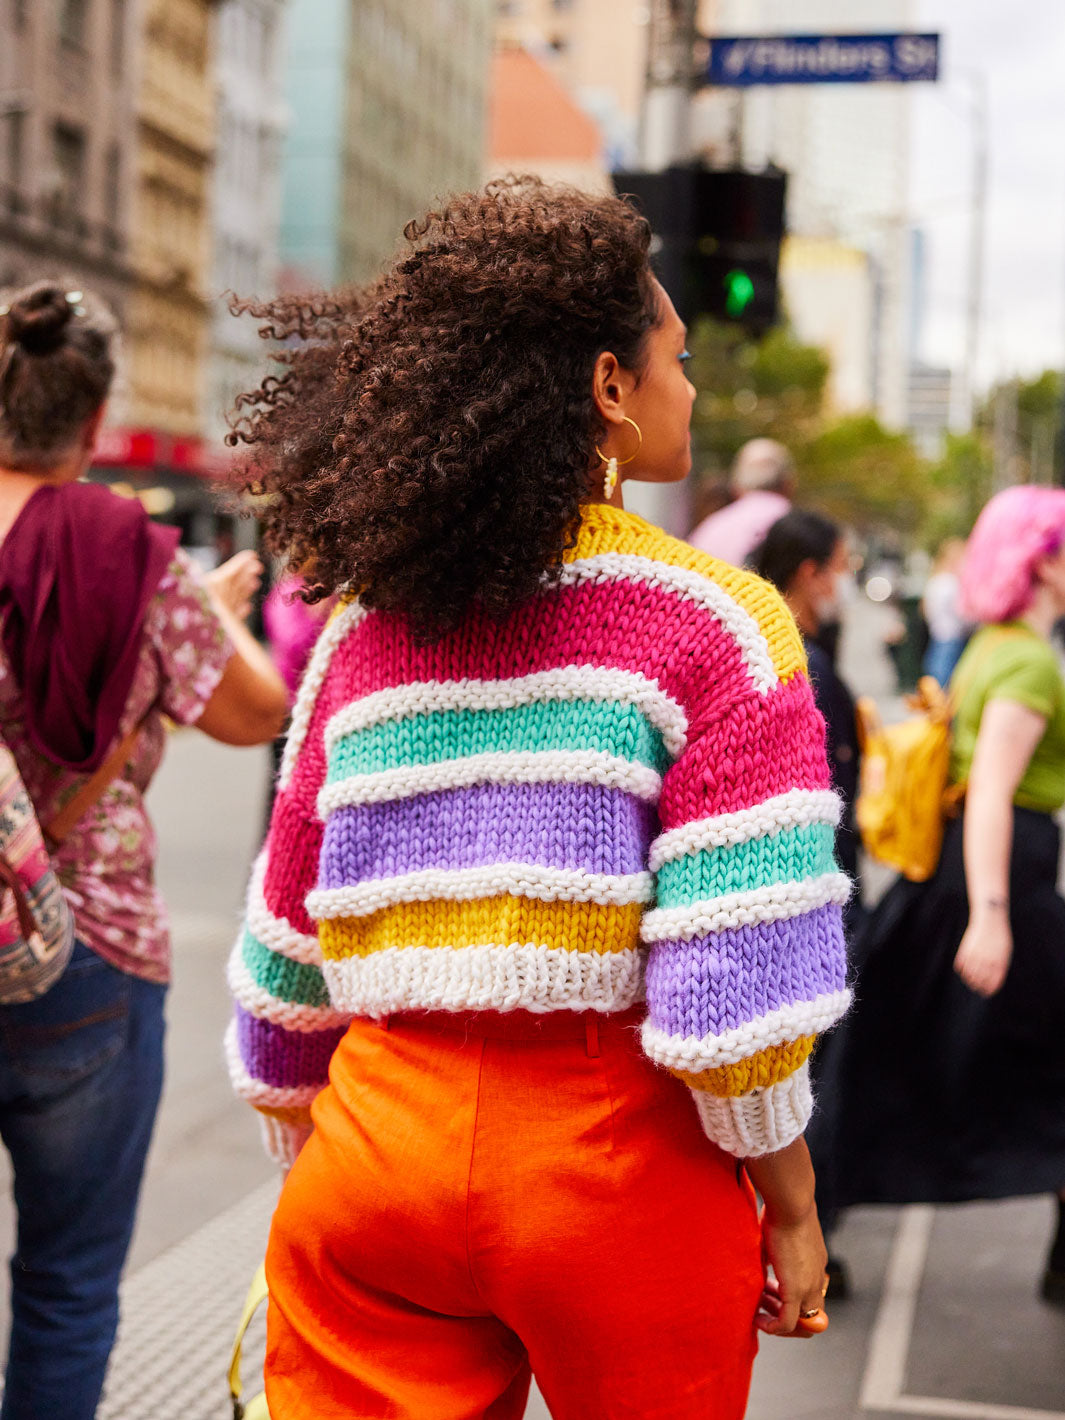 Woman walks away from camera wearing orange pants and a bright colourful knitted jumper